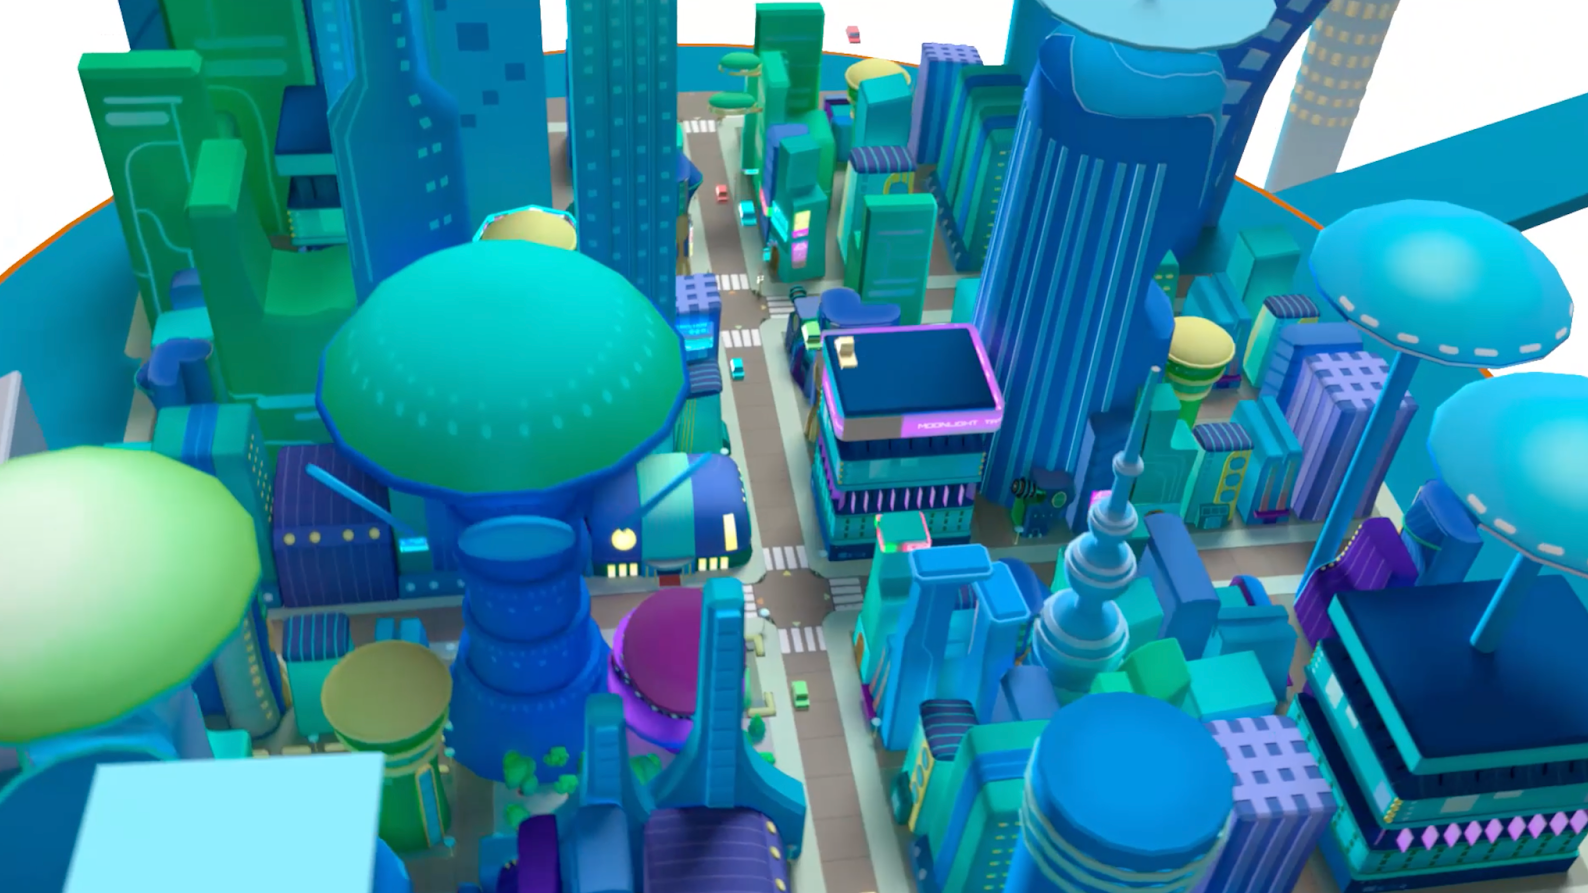 Digital city view in green, blue, and purple.